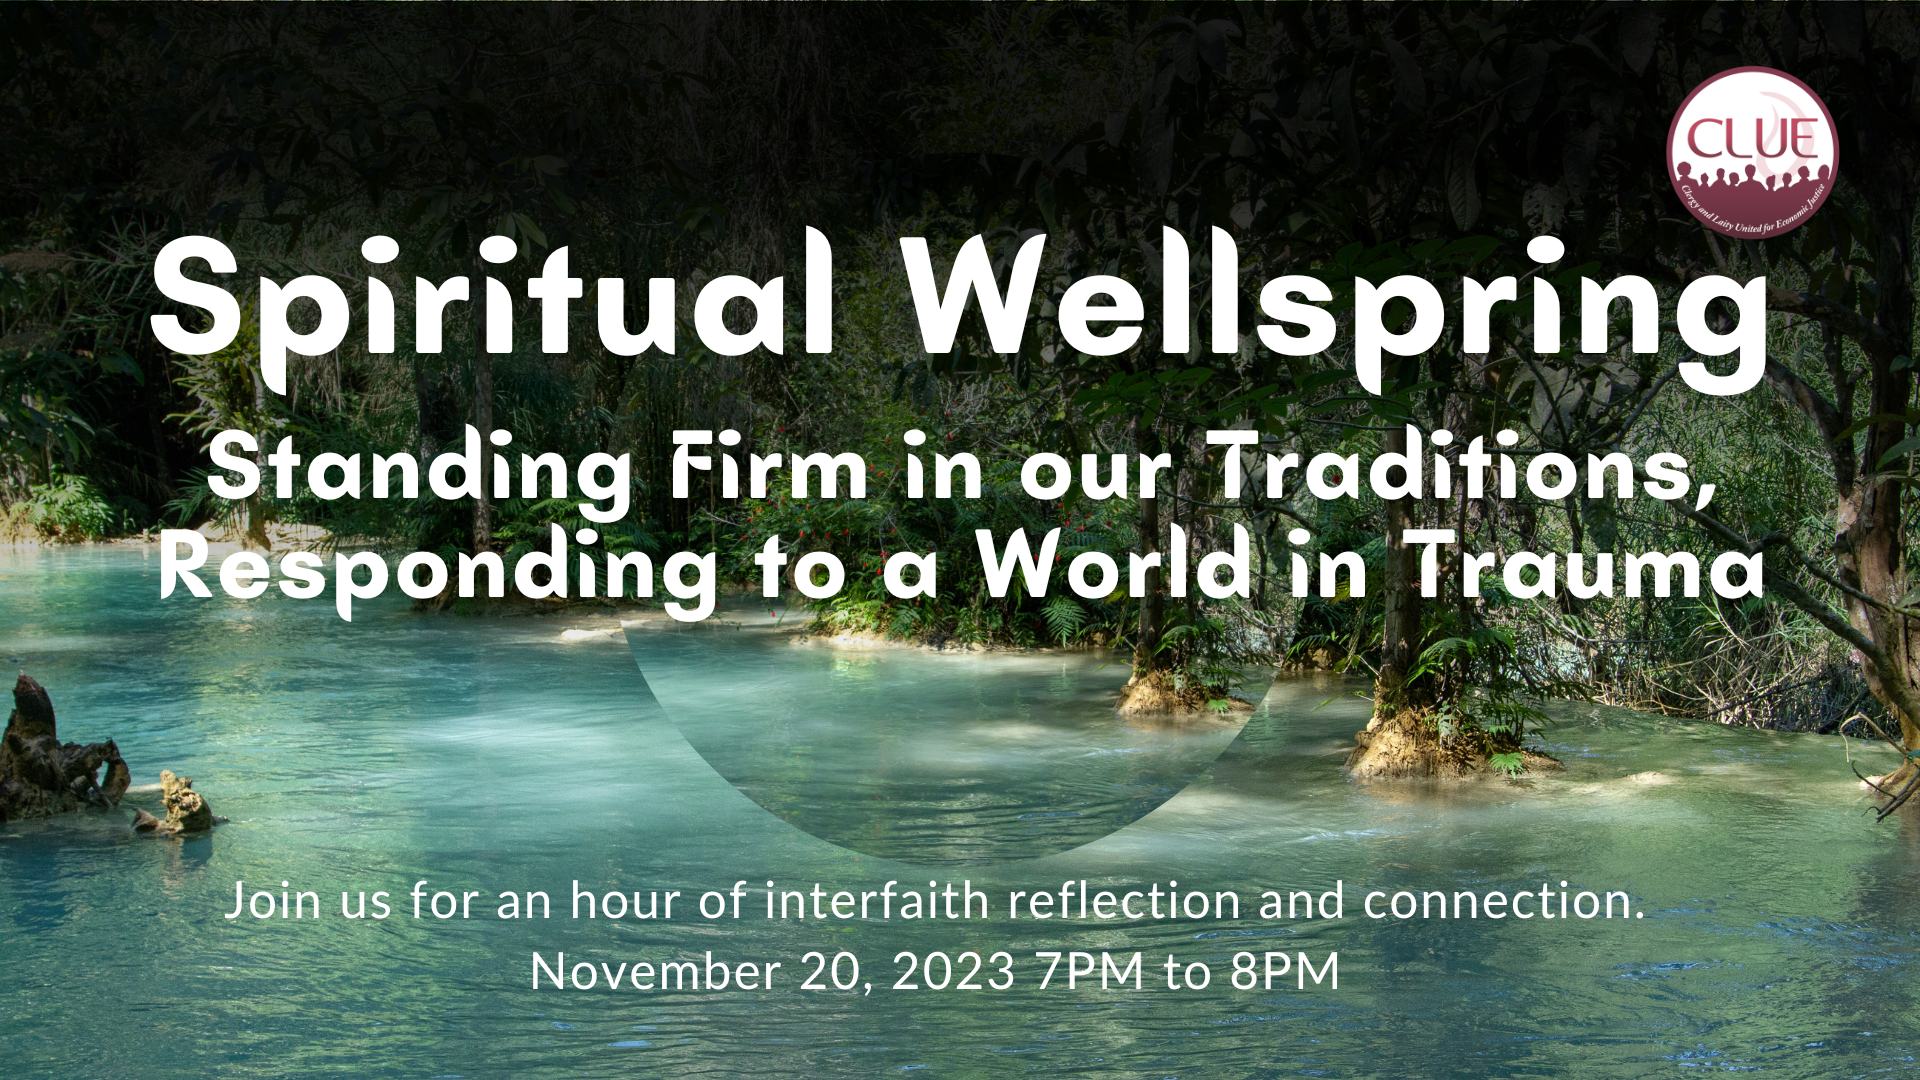 Spiritual Wellspring gathering offers sustenance in trying times.